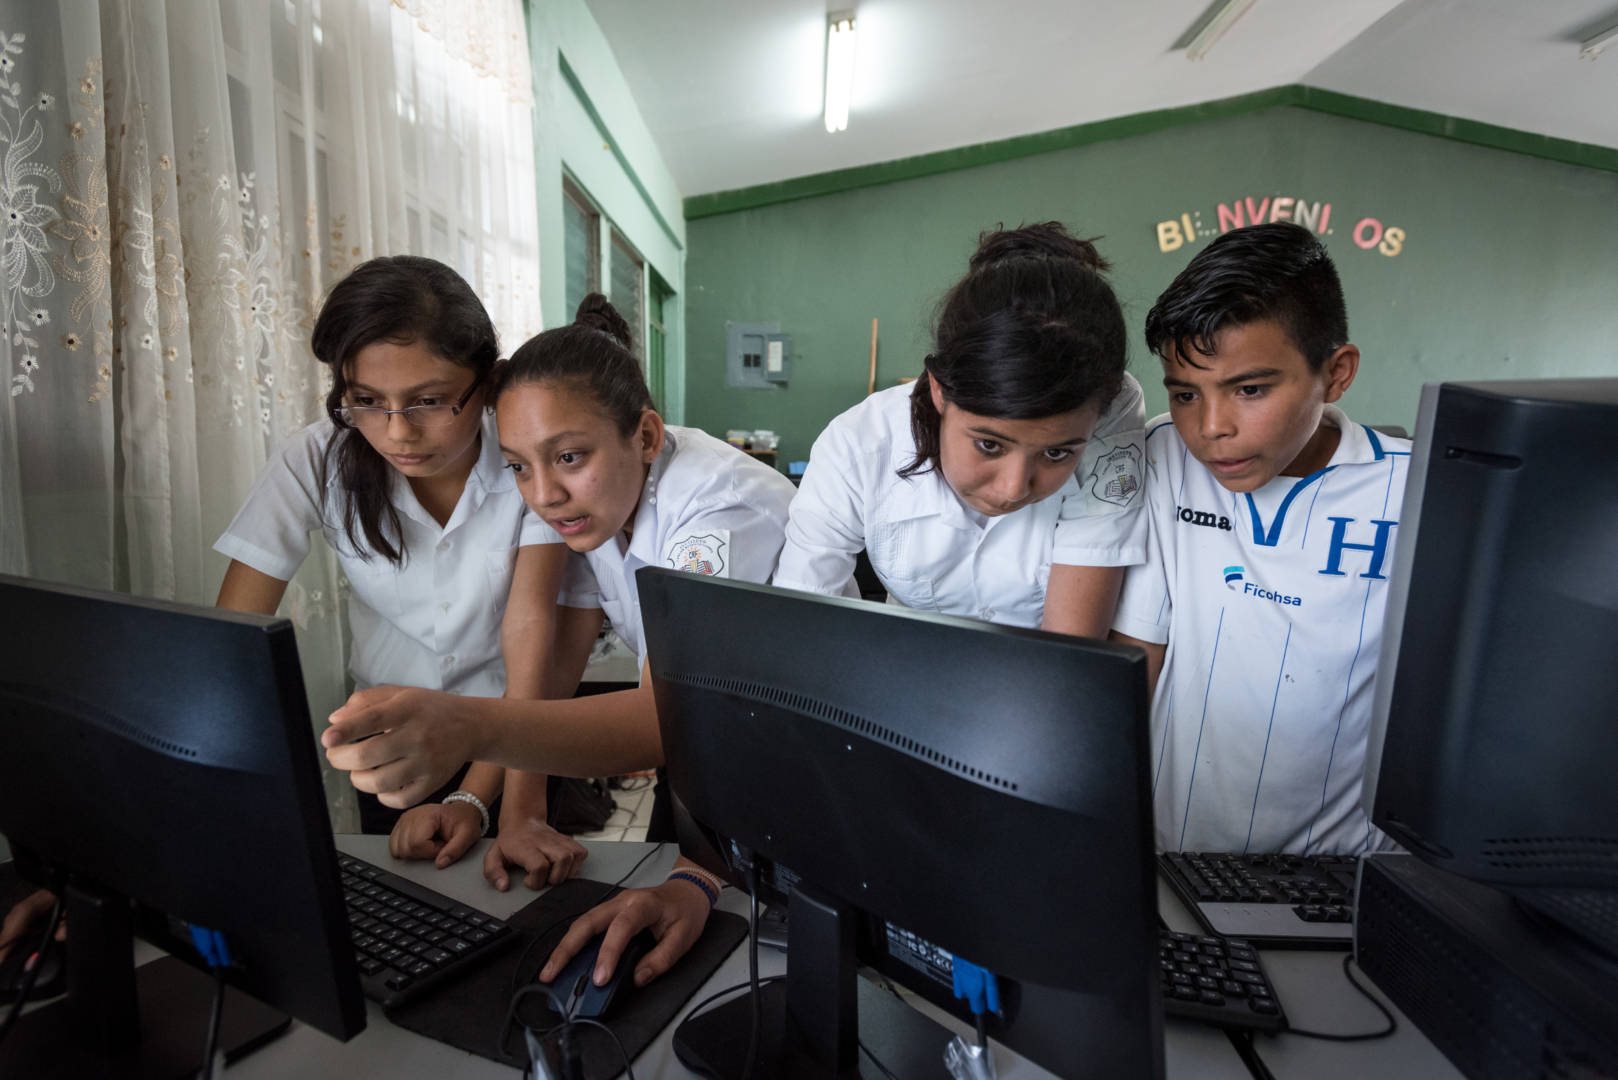 This World Vision technology project in Honduras makes kids' screen time educational. Let's flip the switch on cyberbullying and instead use technology to be kind to yourself and others. Find out how you can help kindness go viral.